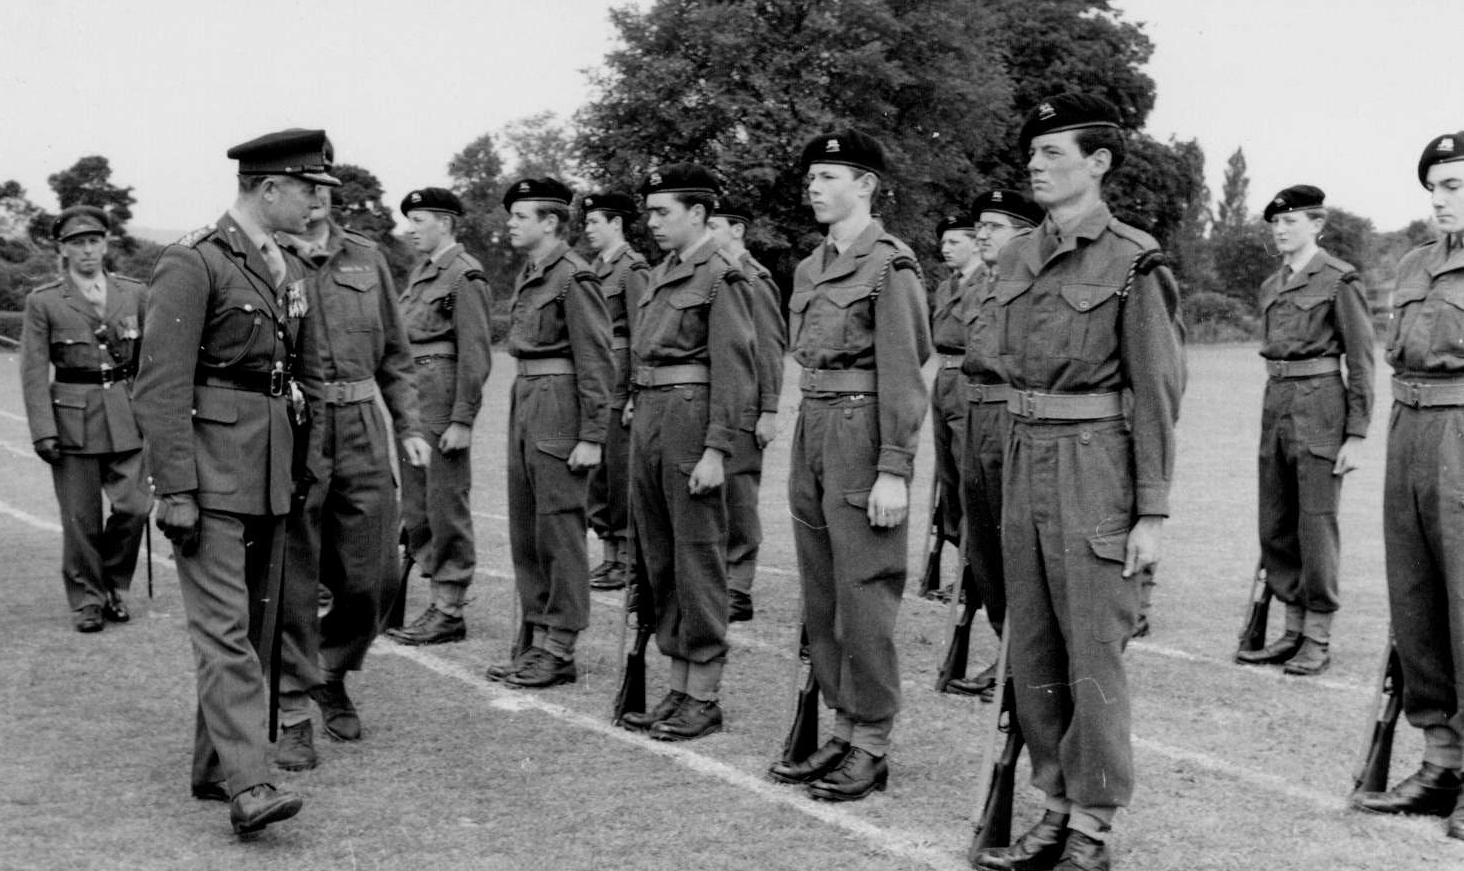 A CCF inspection from 1961. Were you among the ranks?